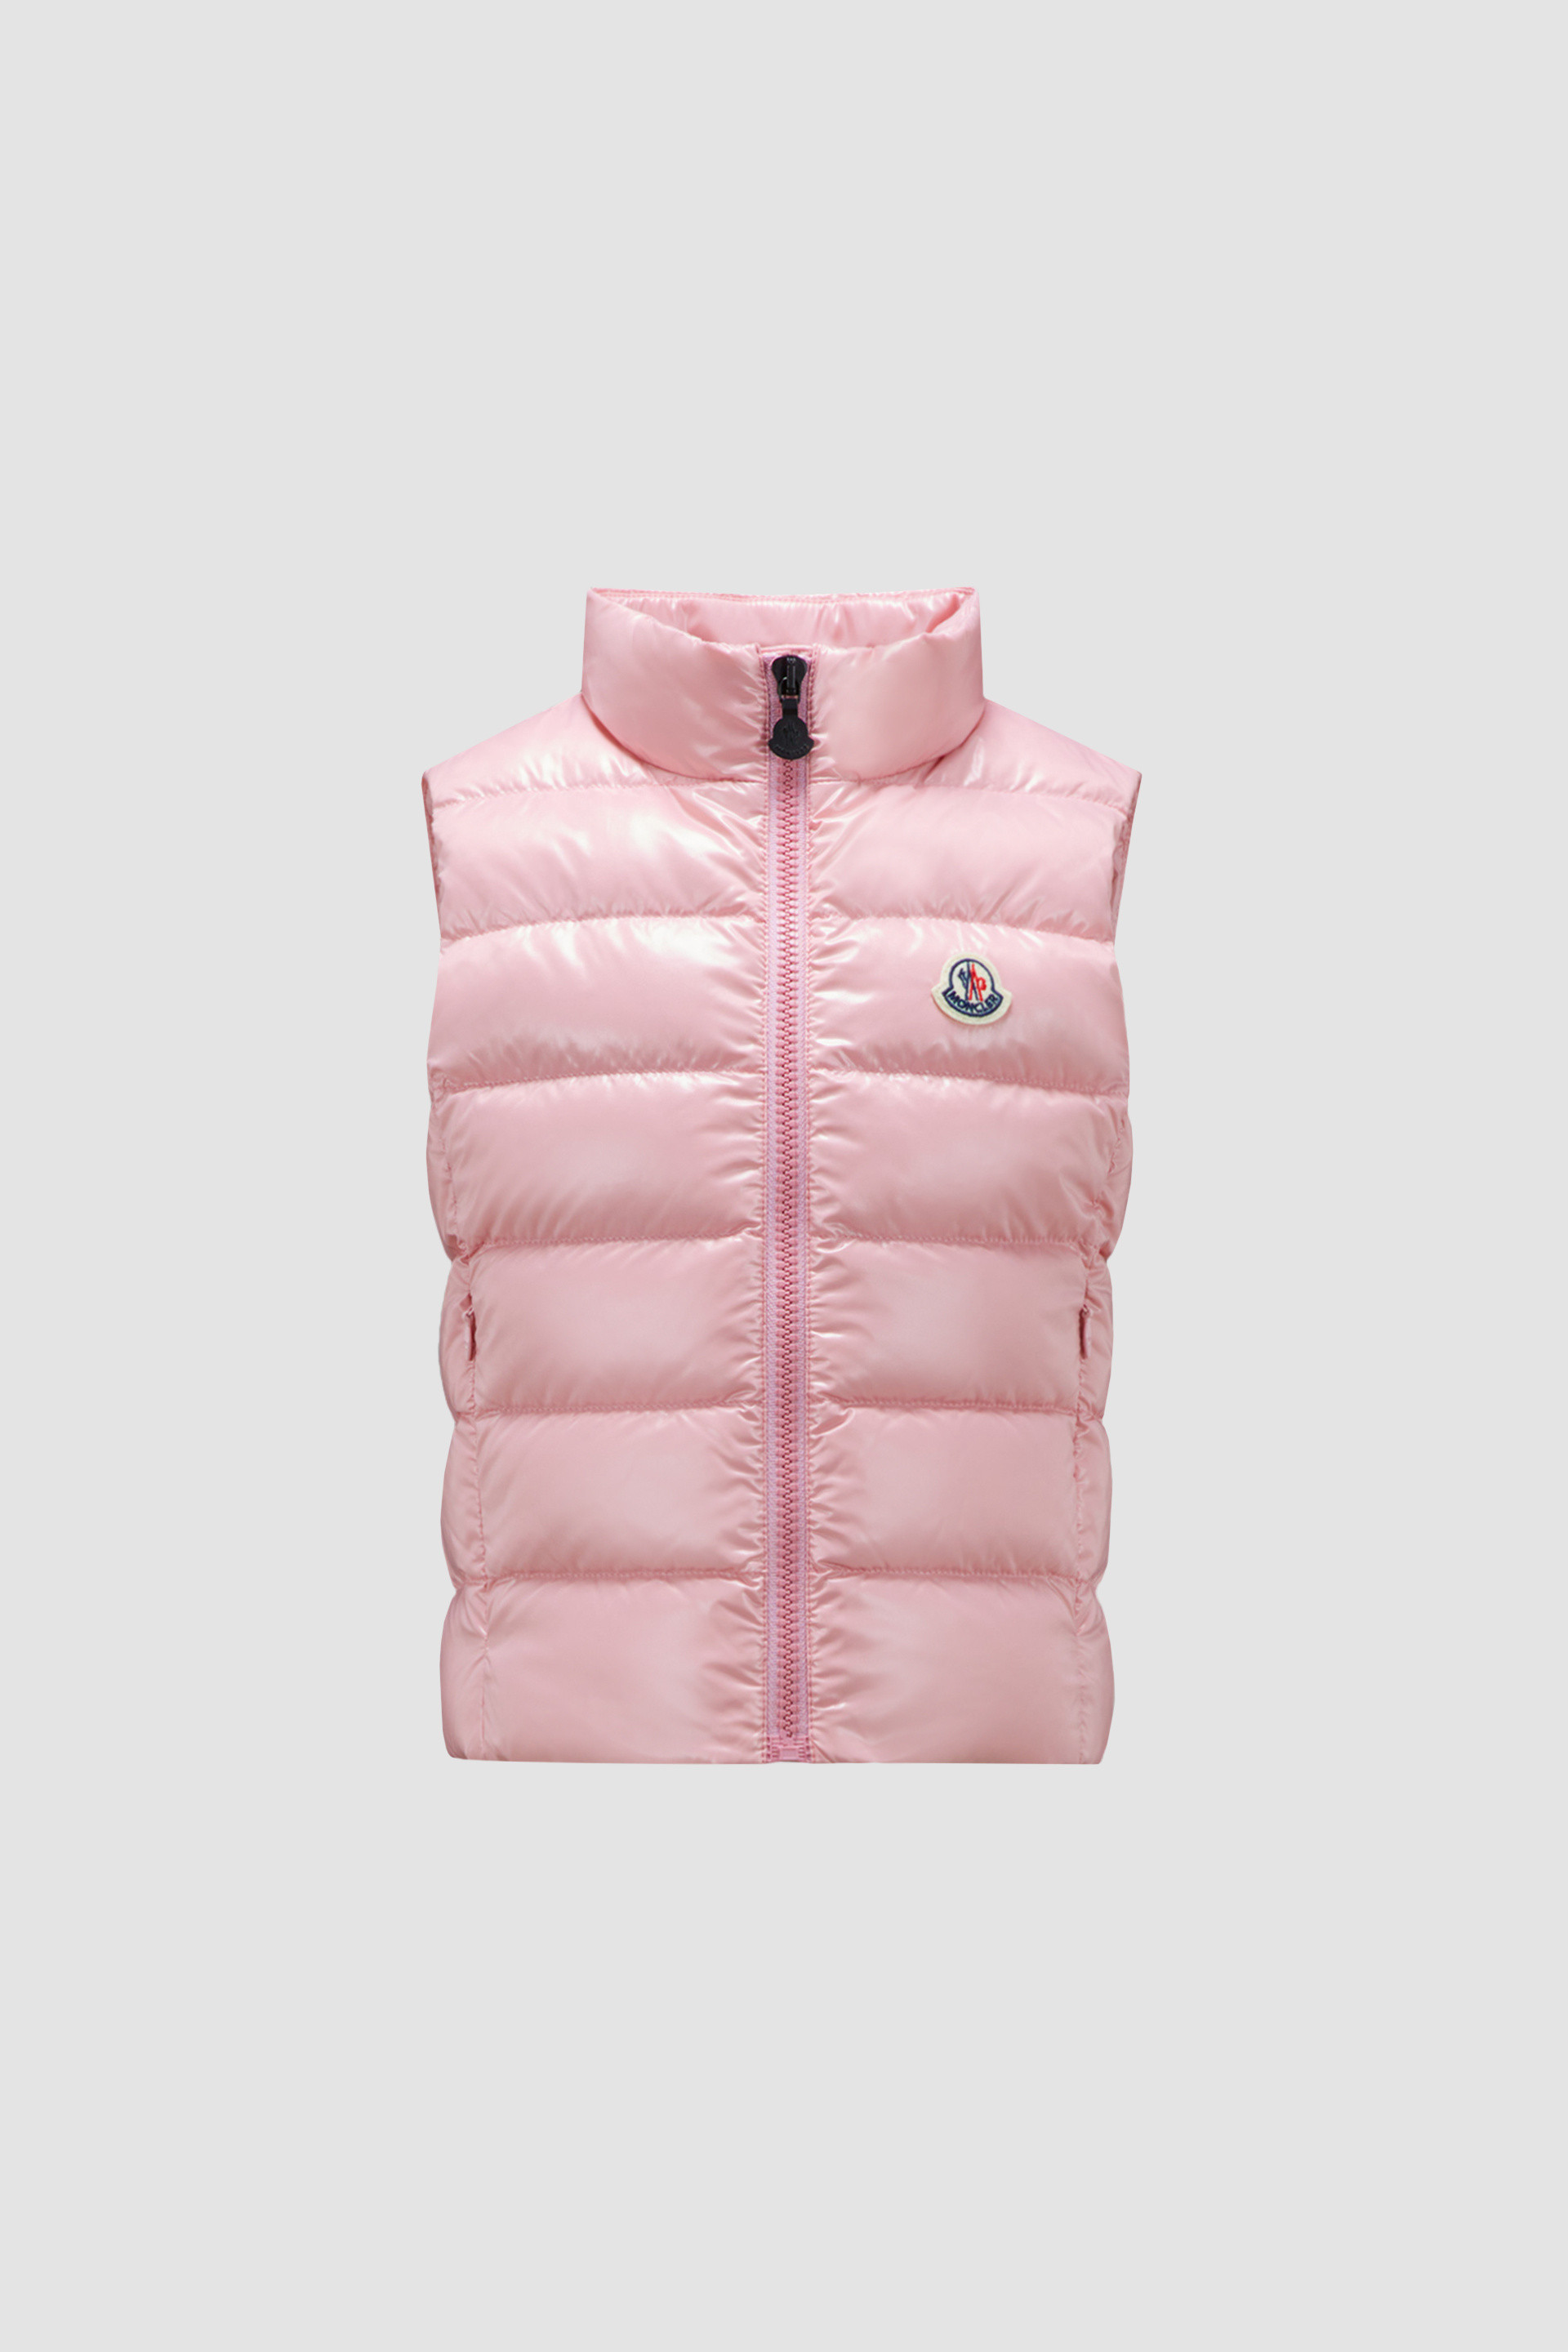 MONCLER美品 MONCLER KIDS モンクレール キッズ ダウンベスト ピンク